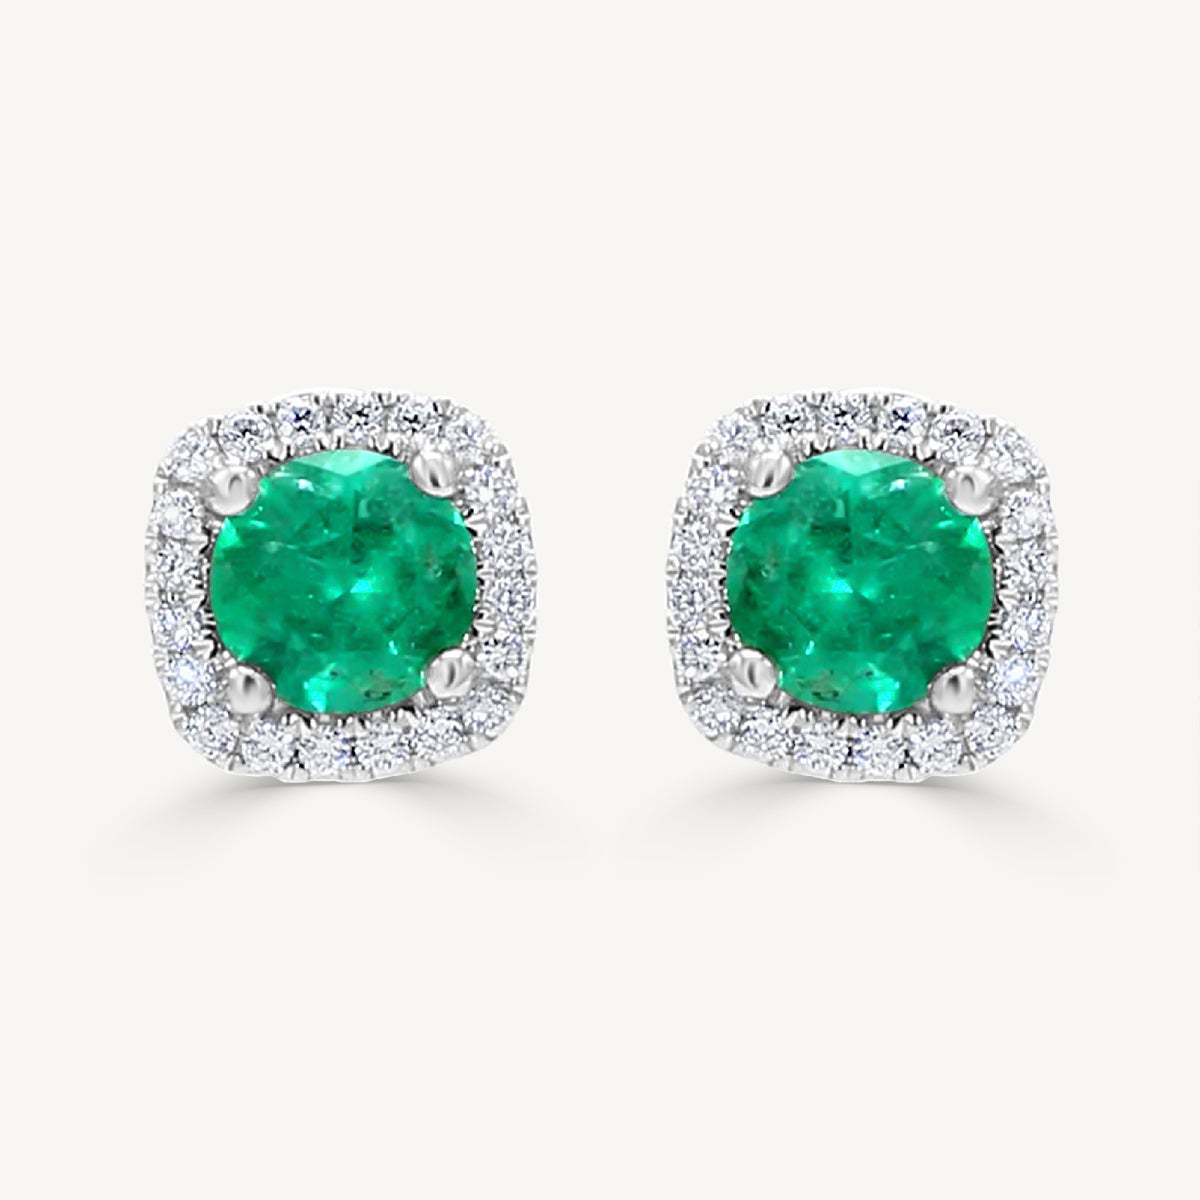 Natural Round Emerald and White Diamond 1.19 Carat TW White Gold Stud Earrings